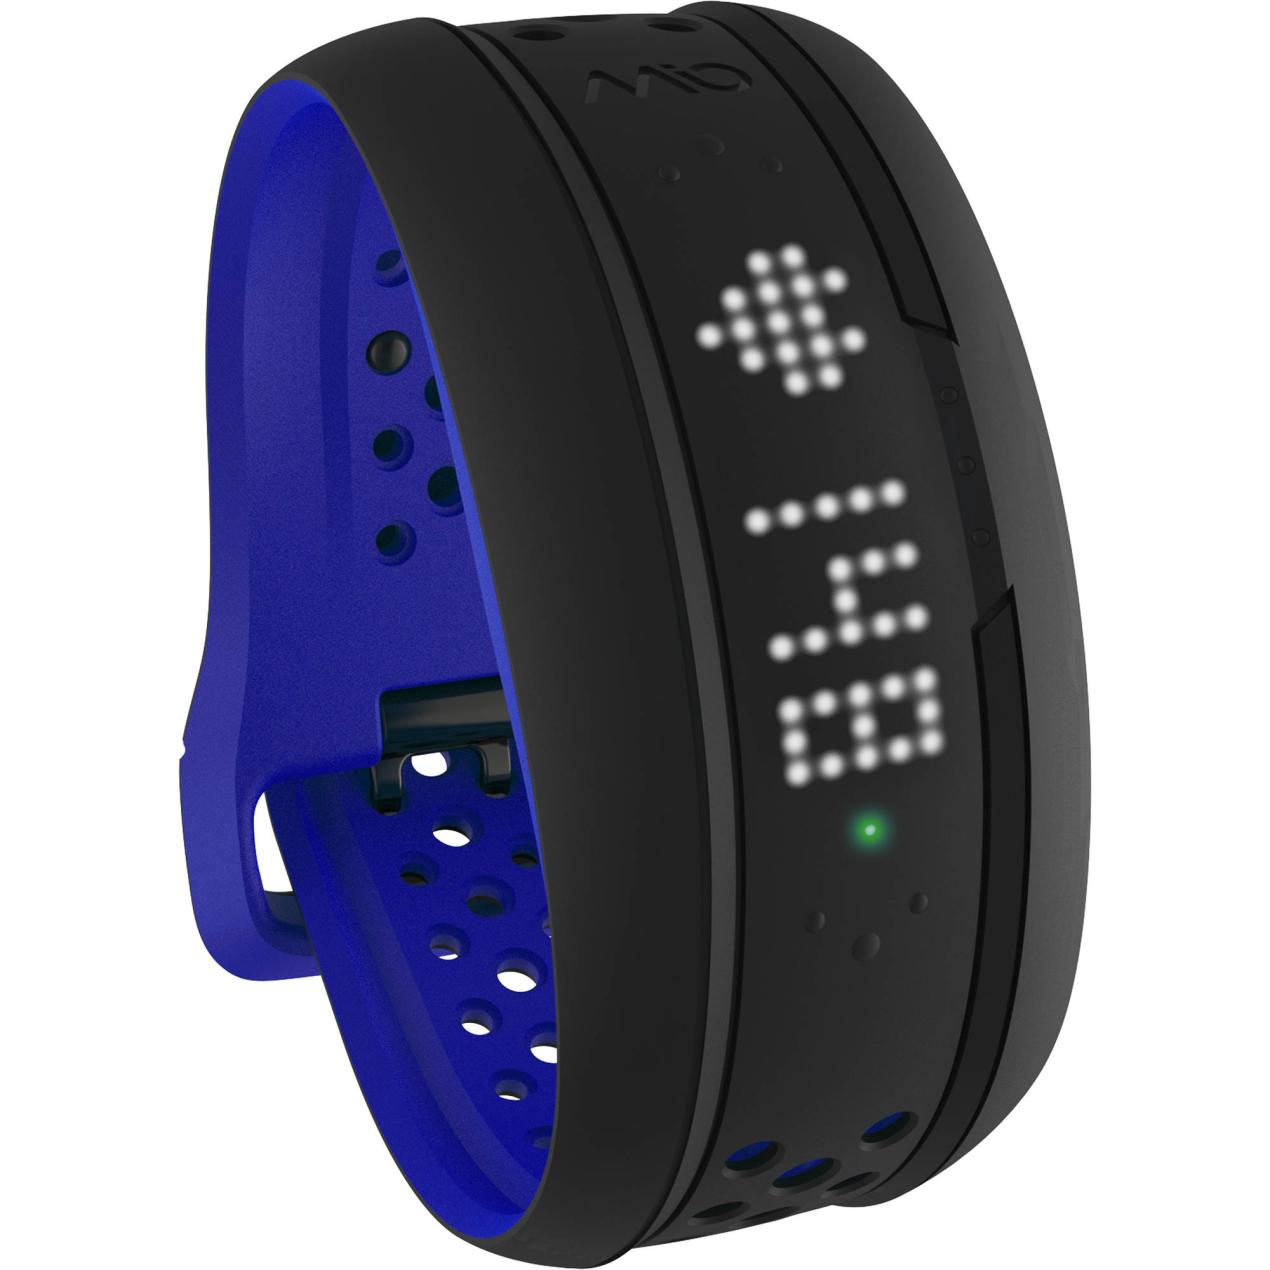 How Can I Get Started Using Fitness Apps And Heart Rate Monitors?